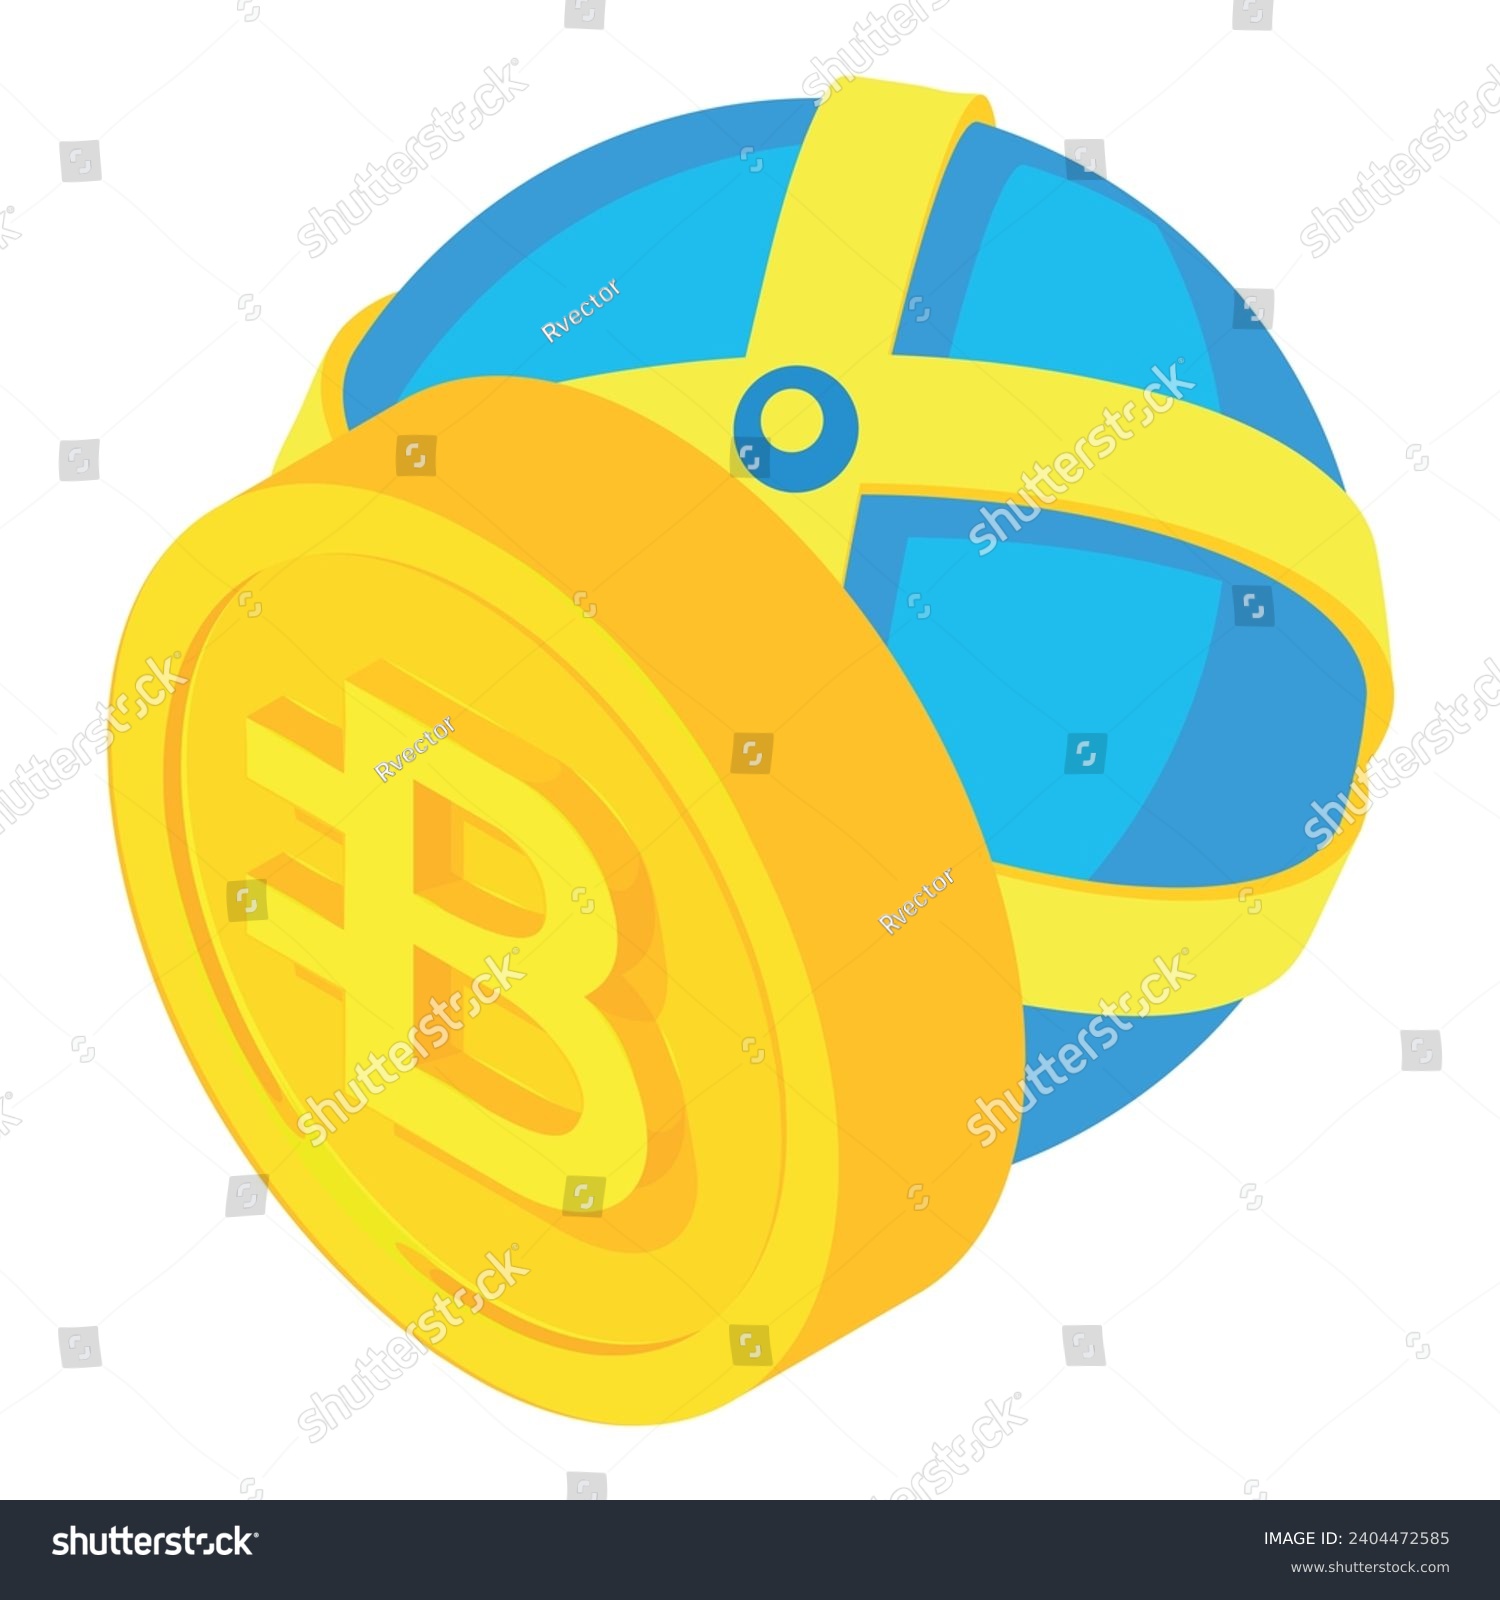 SVG of Bytecoin cryptocurrency icon isometric vector. Globe icon near big bytecoin coin. Digital money, global technology, cryptocurrency svg